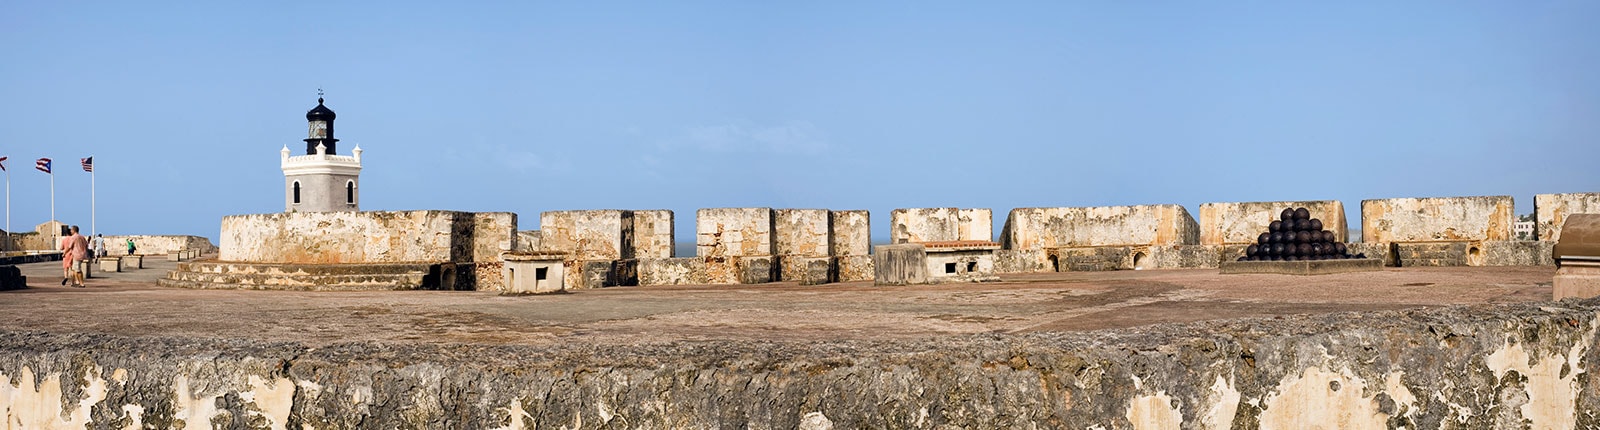 View of the interior walls of the historic fortress in San Juan, Puerto Rico